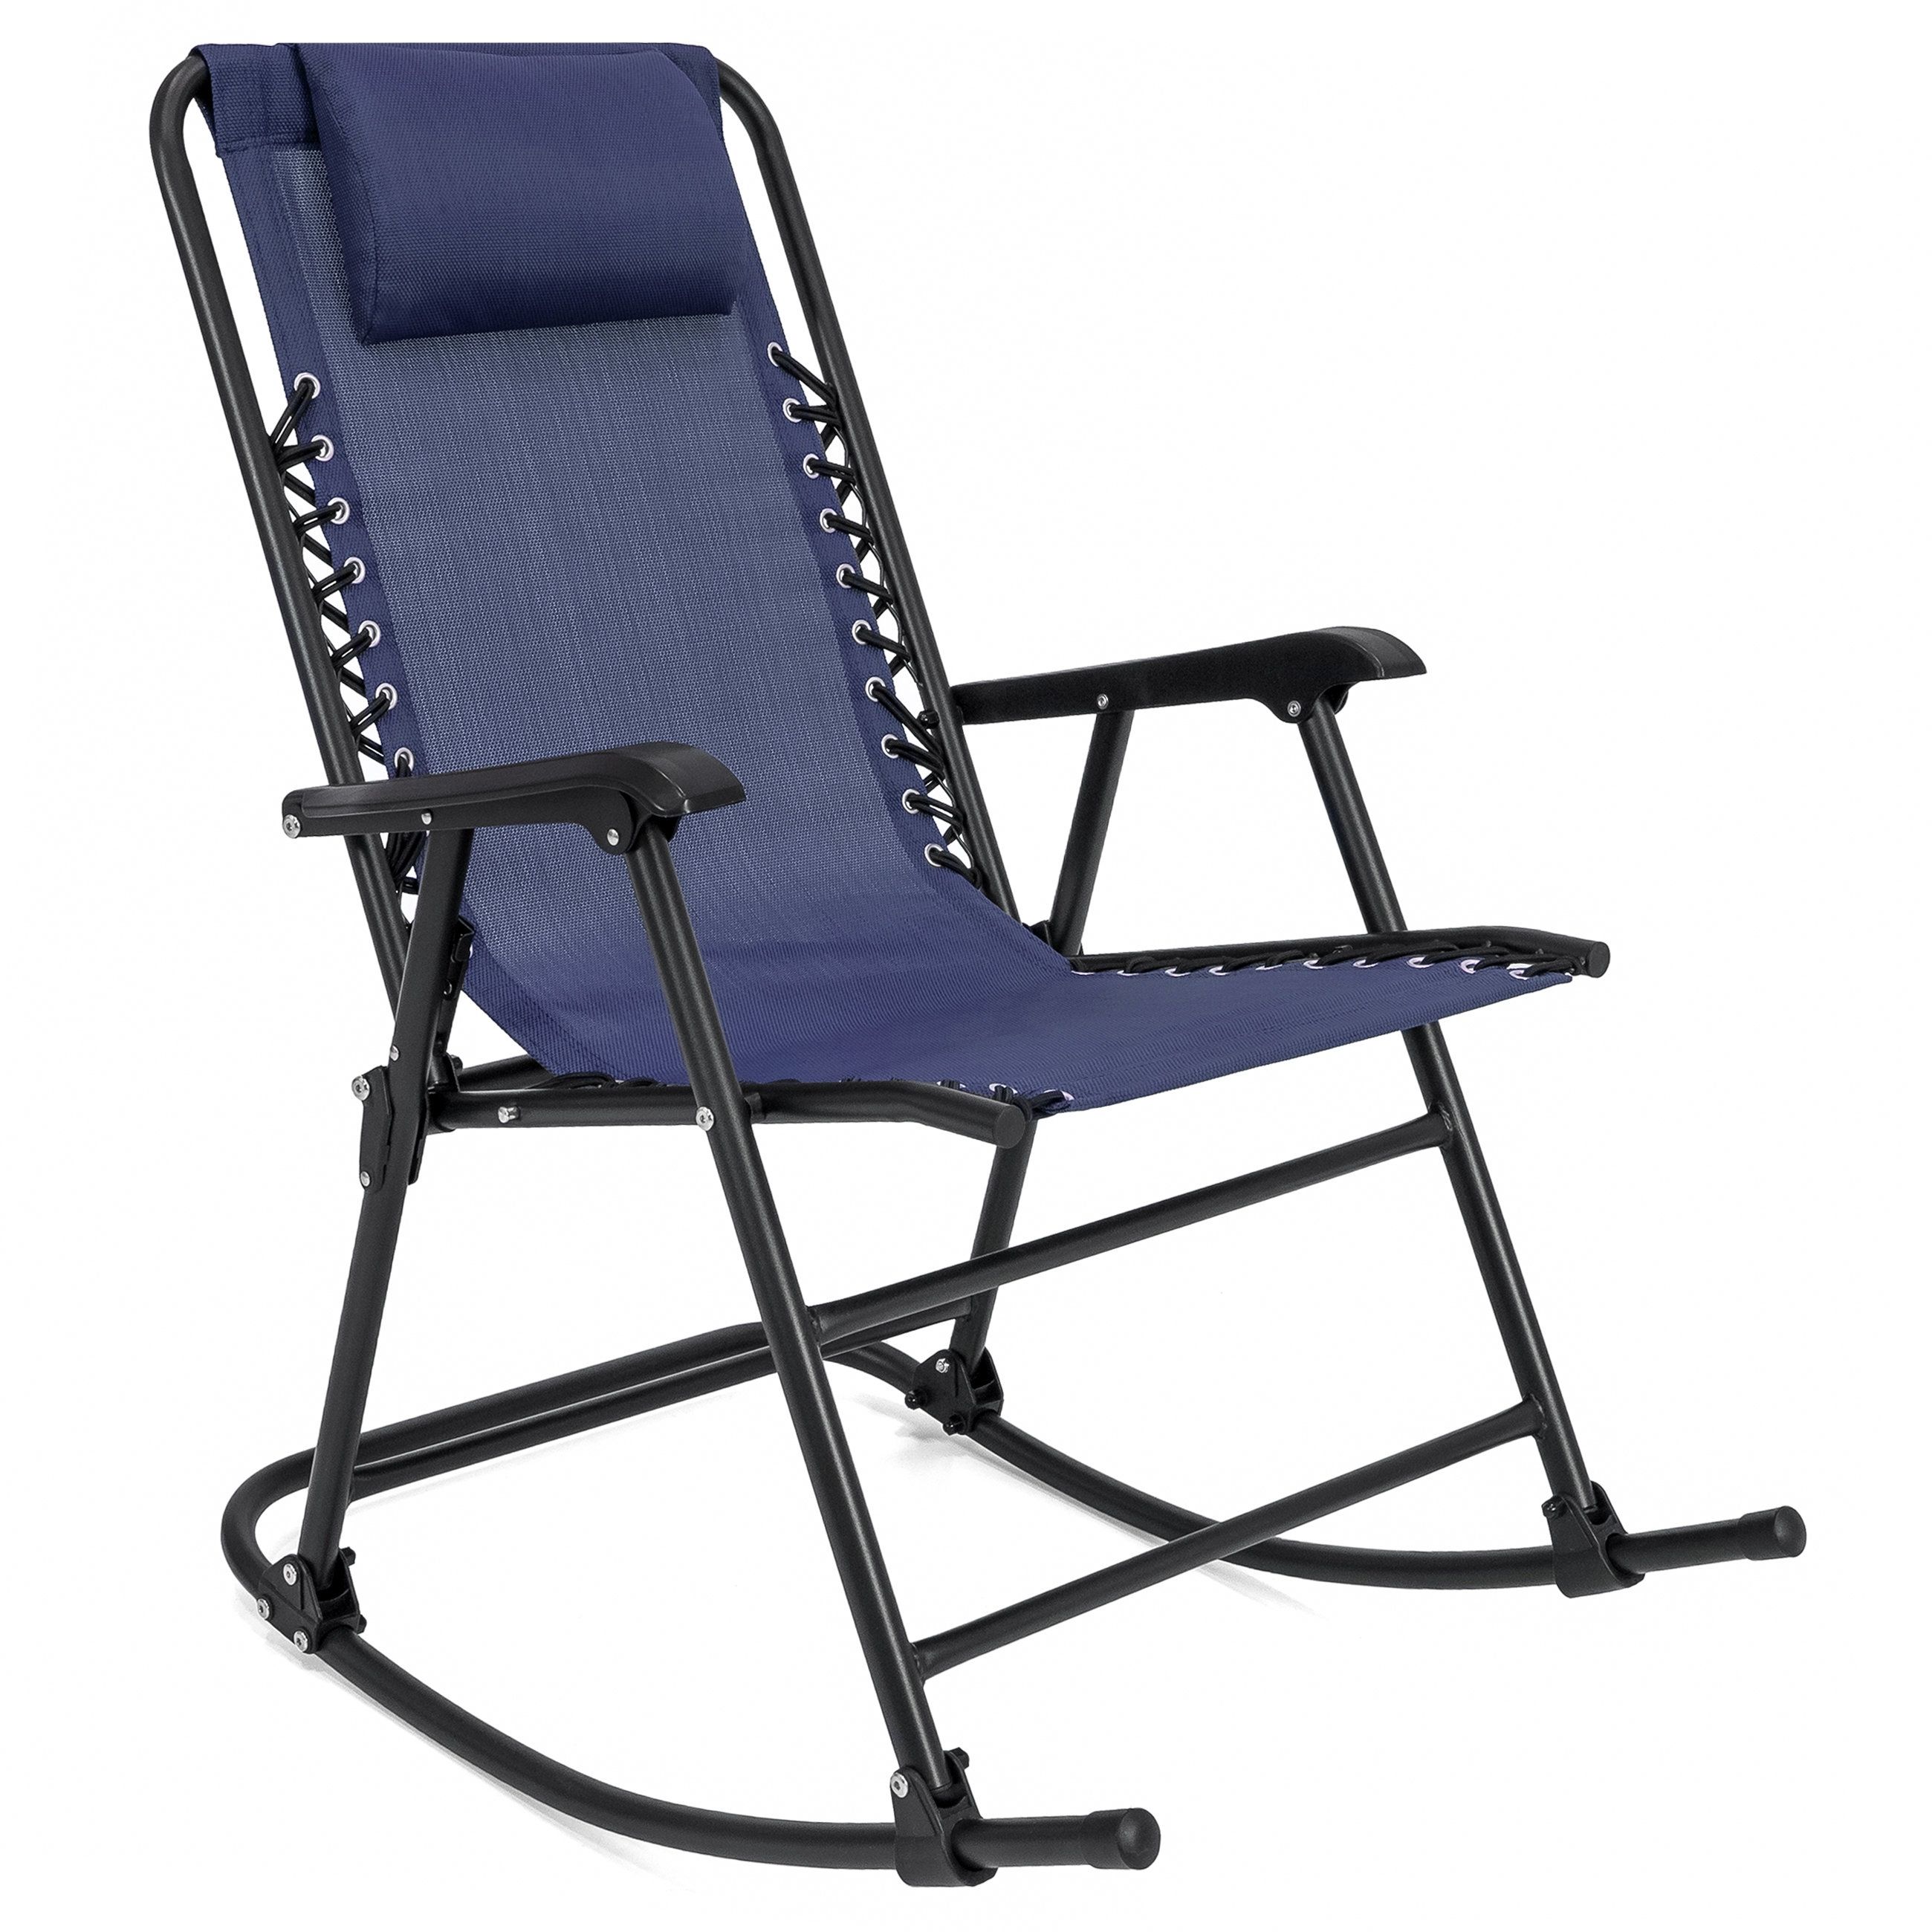 Chair : Rocking Patio Chair Parts With Rocking Lawn Chair As Well As Pertaining To Rocking Chairs Adelaide (View 13 of 15)